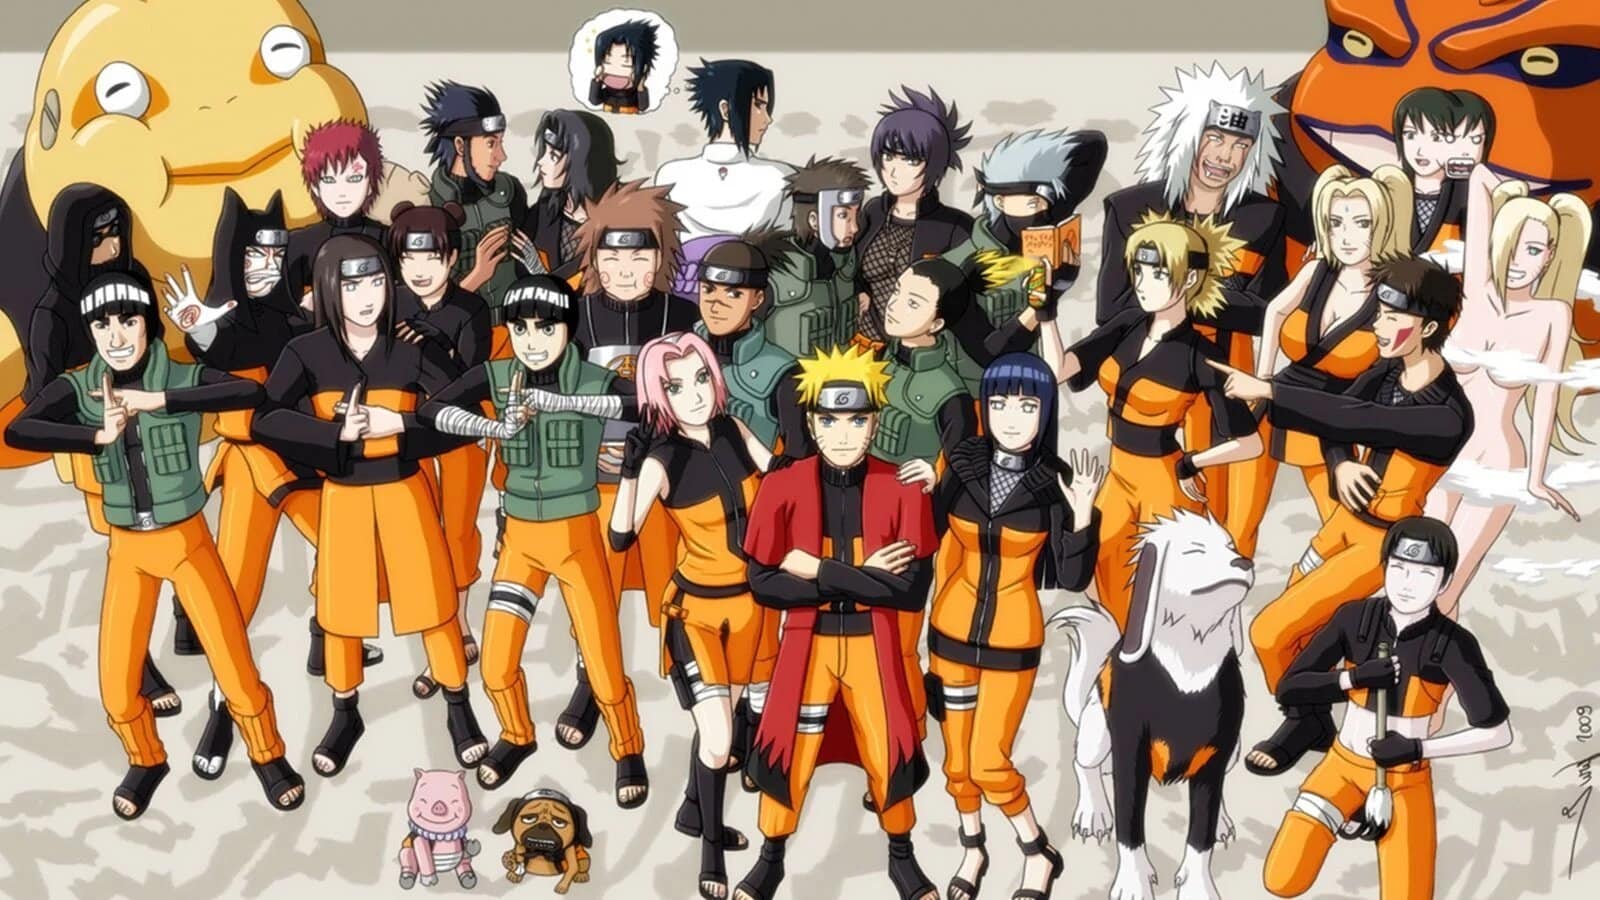 30 Most Popular Boy Anime Characters Ranked Worst To Best